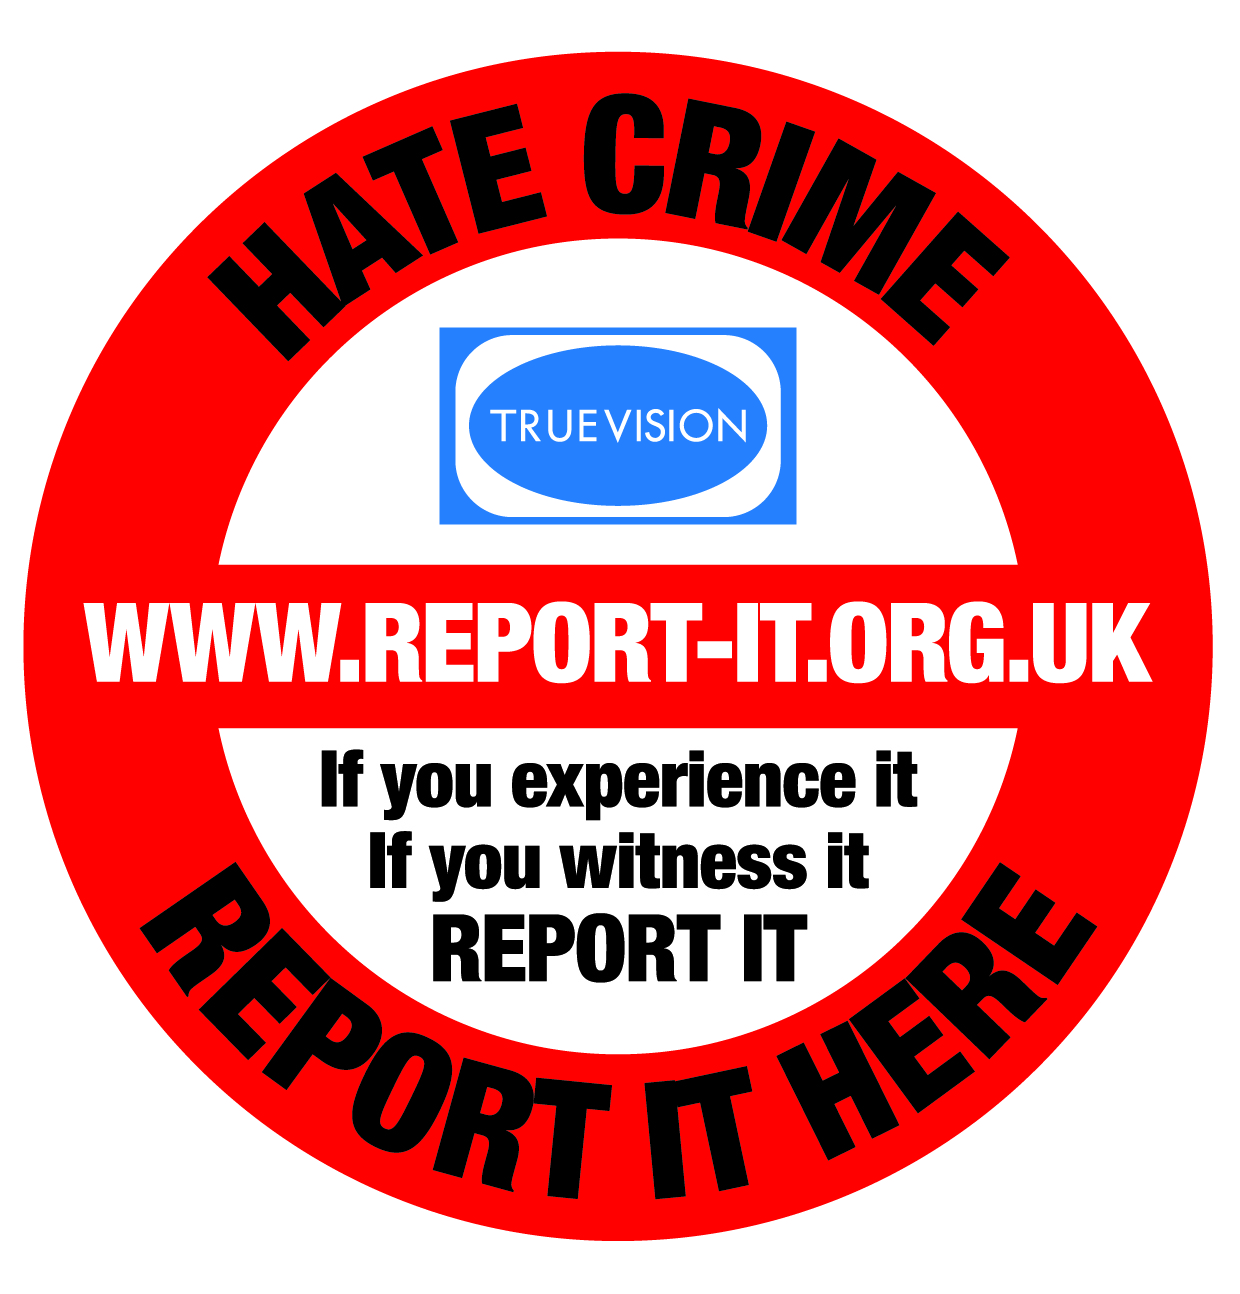 Hate Crime - Report it Here. If you experience it. If you witness it. REPORT IT.